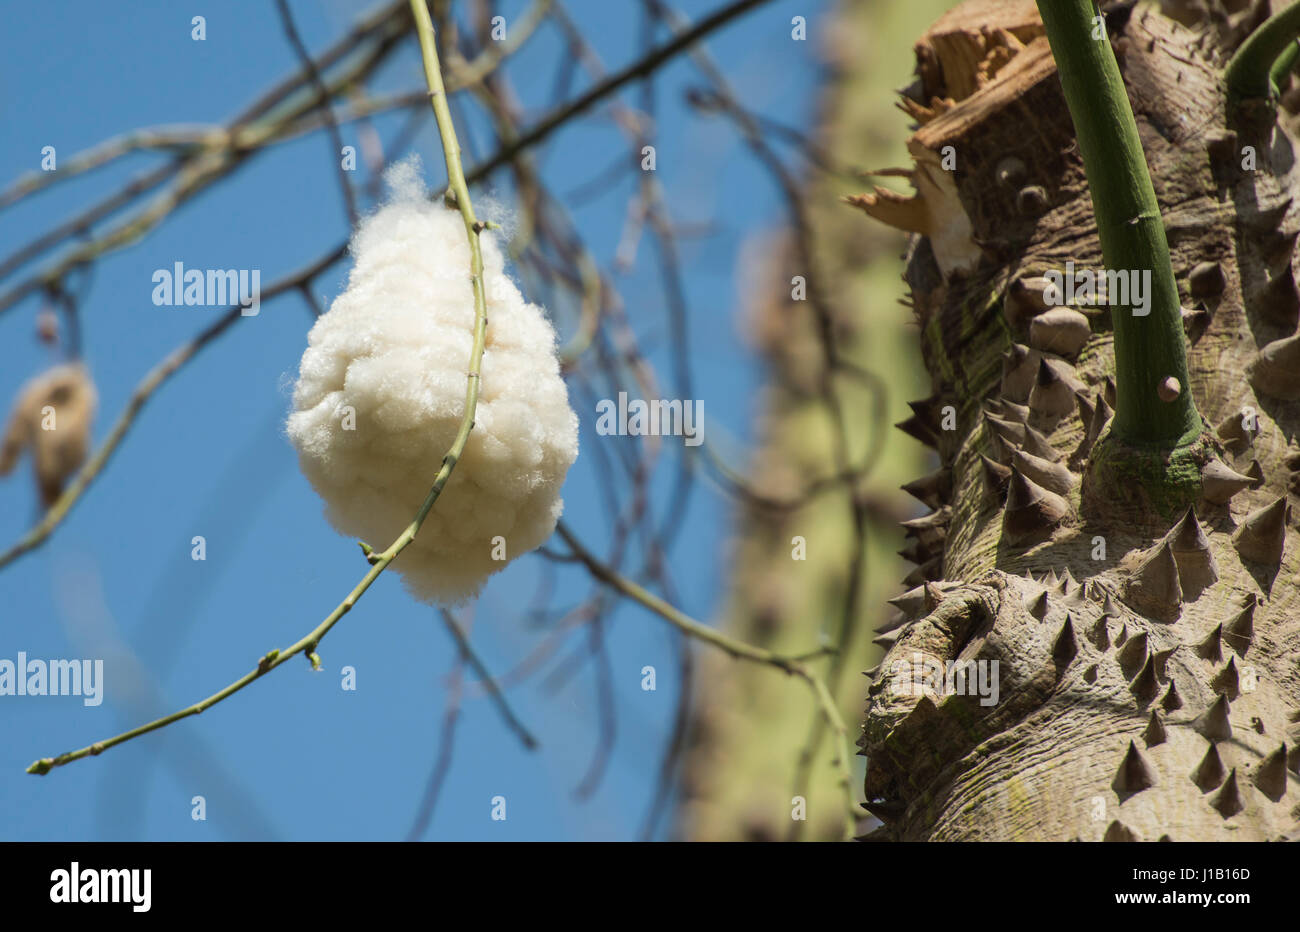 Close-up detail of open fruit seed pod on silk floss tree ceiba speciosa with spiky trunk Stock Photo